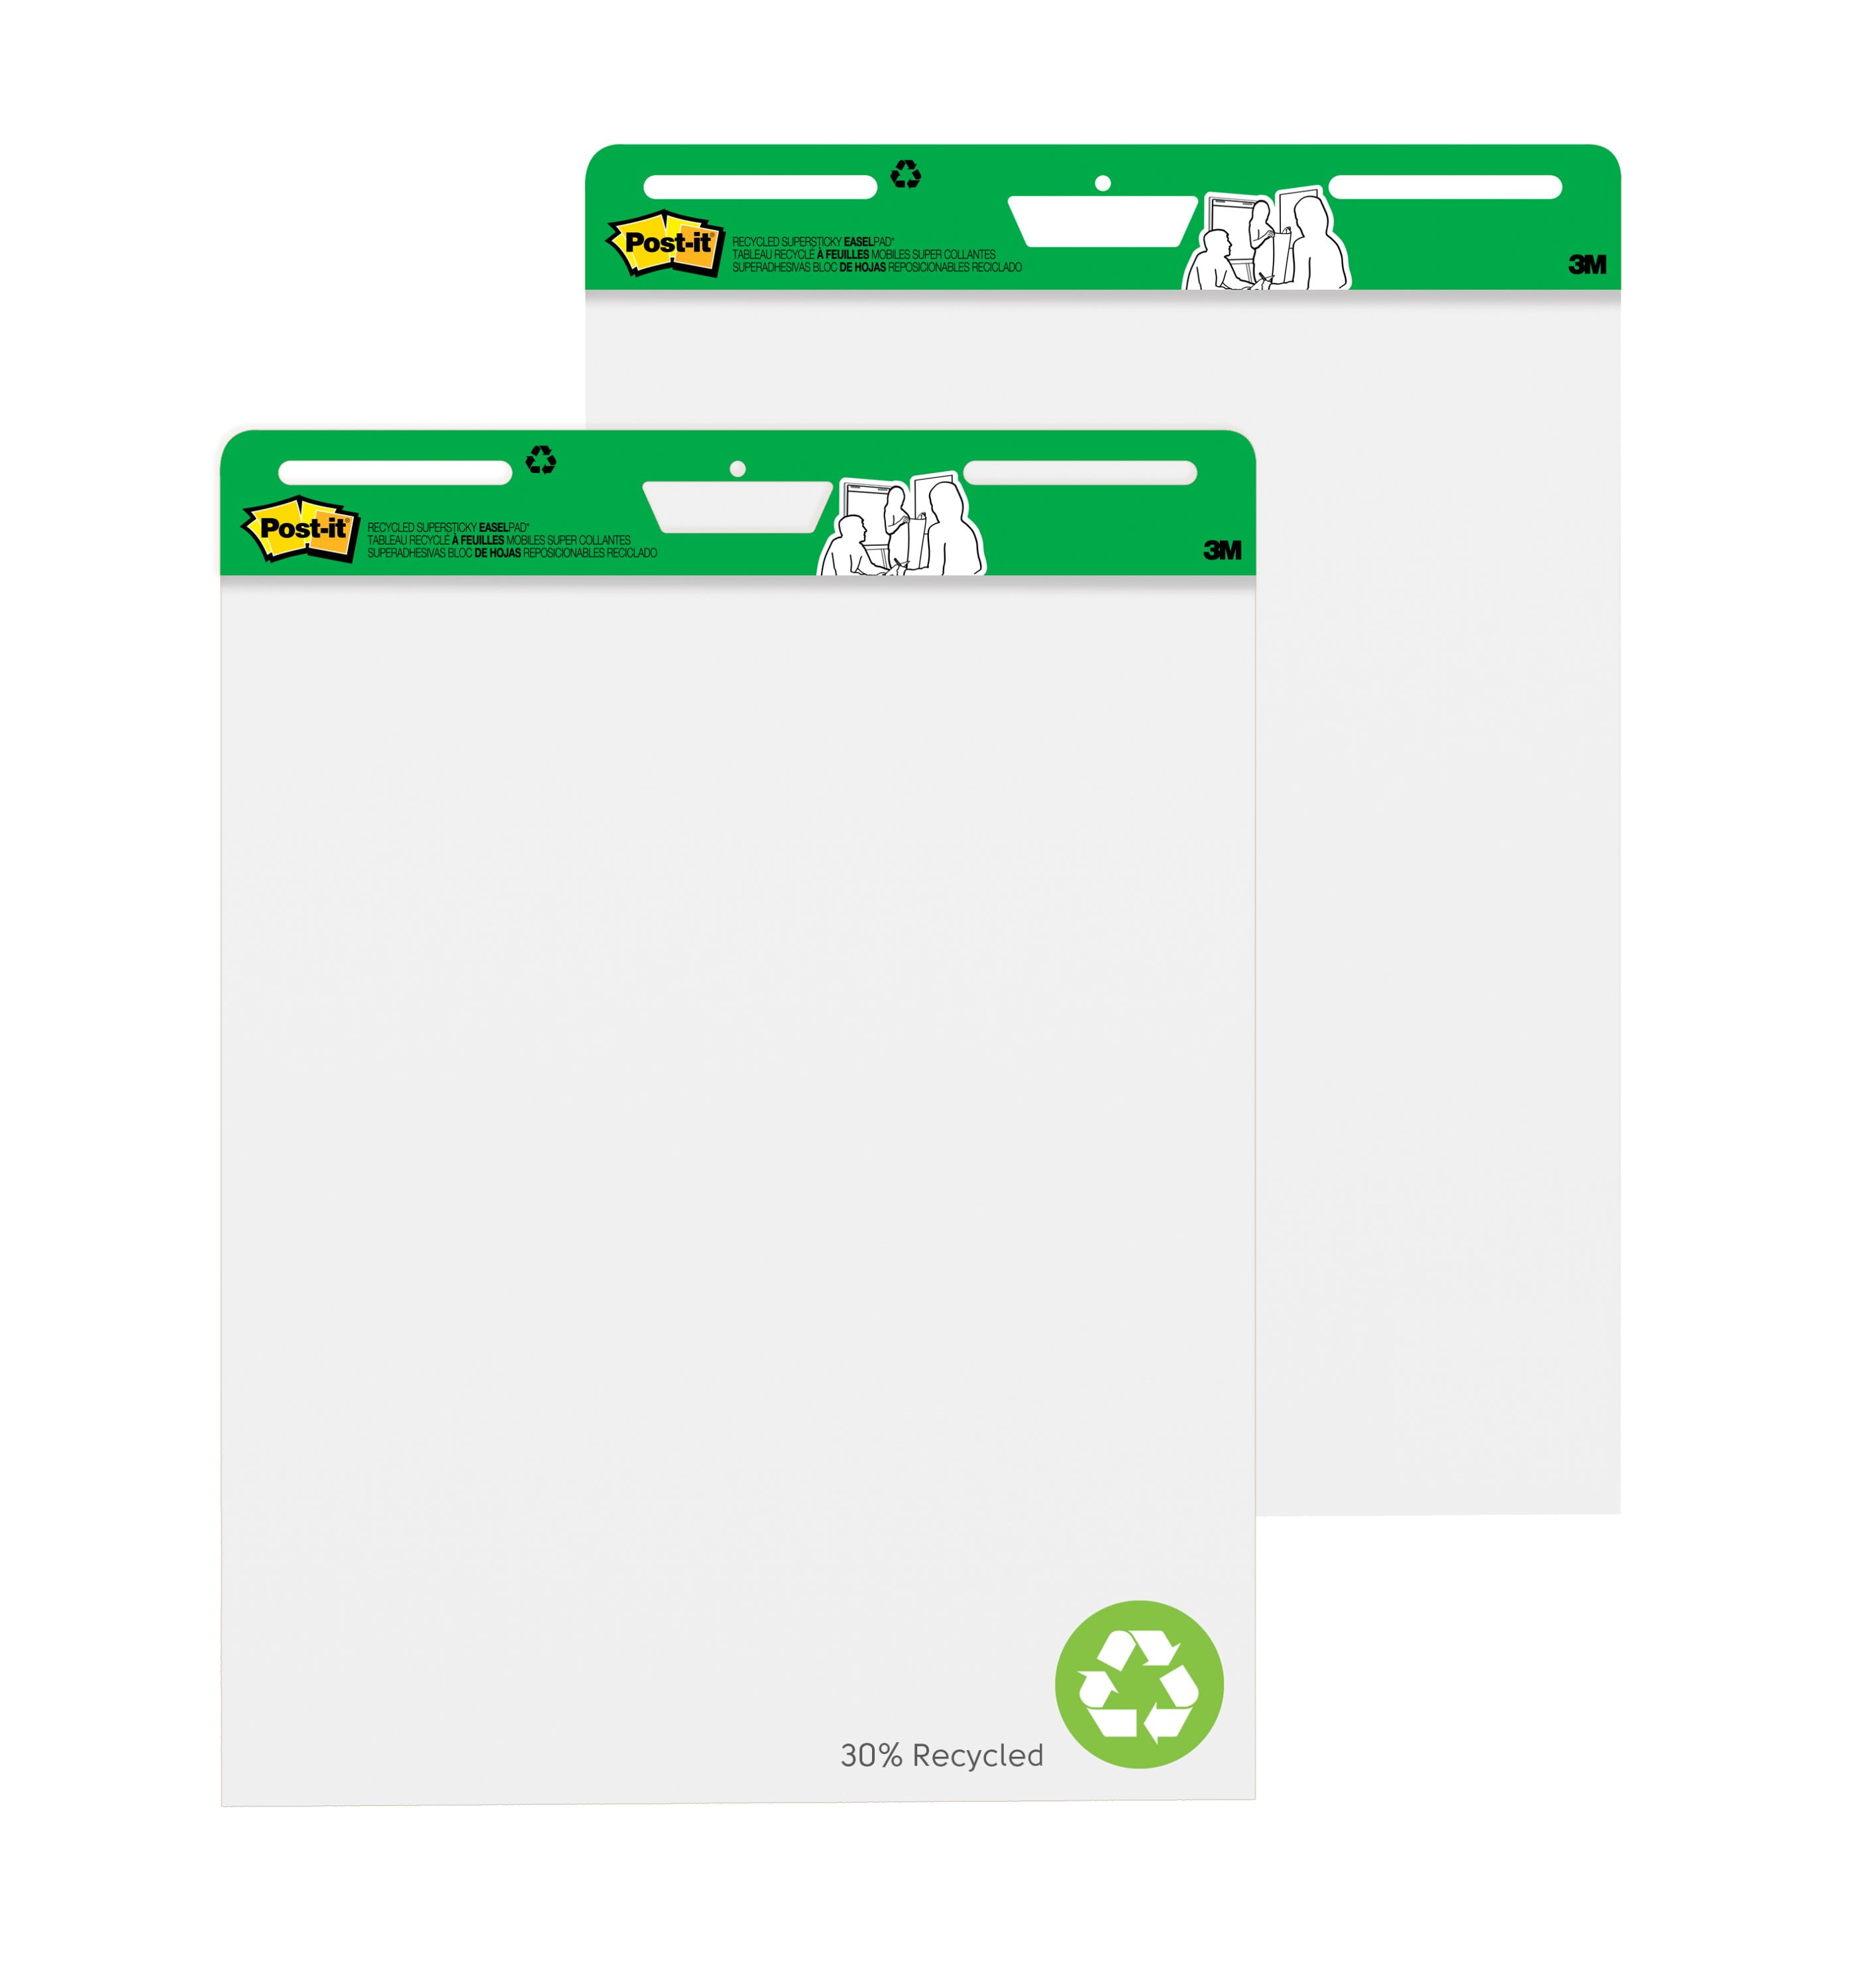 Post-it Super Sticky Easel Pads, 25 in. x 30 in., White, 4 Pads 